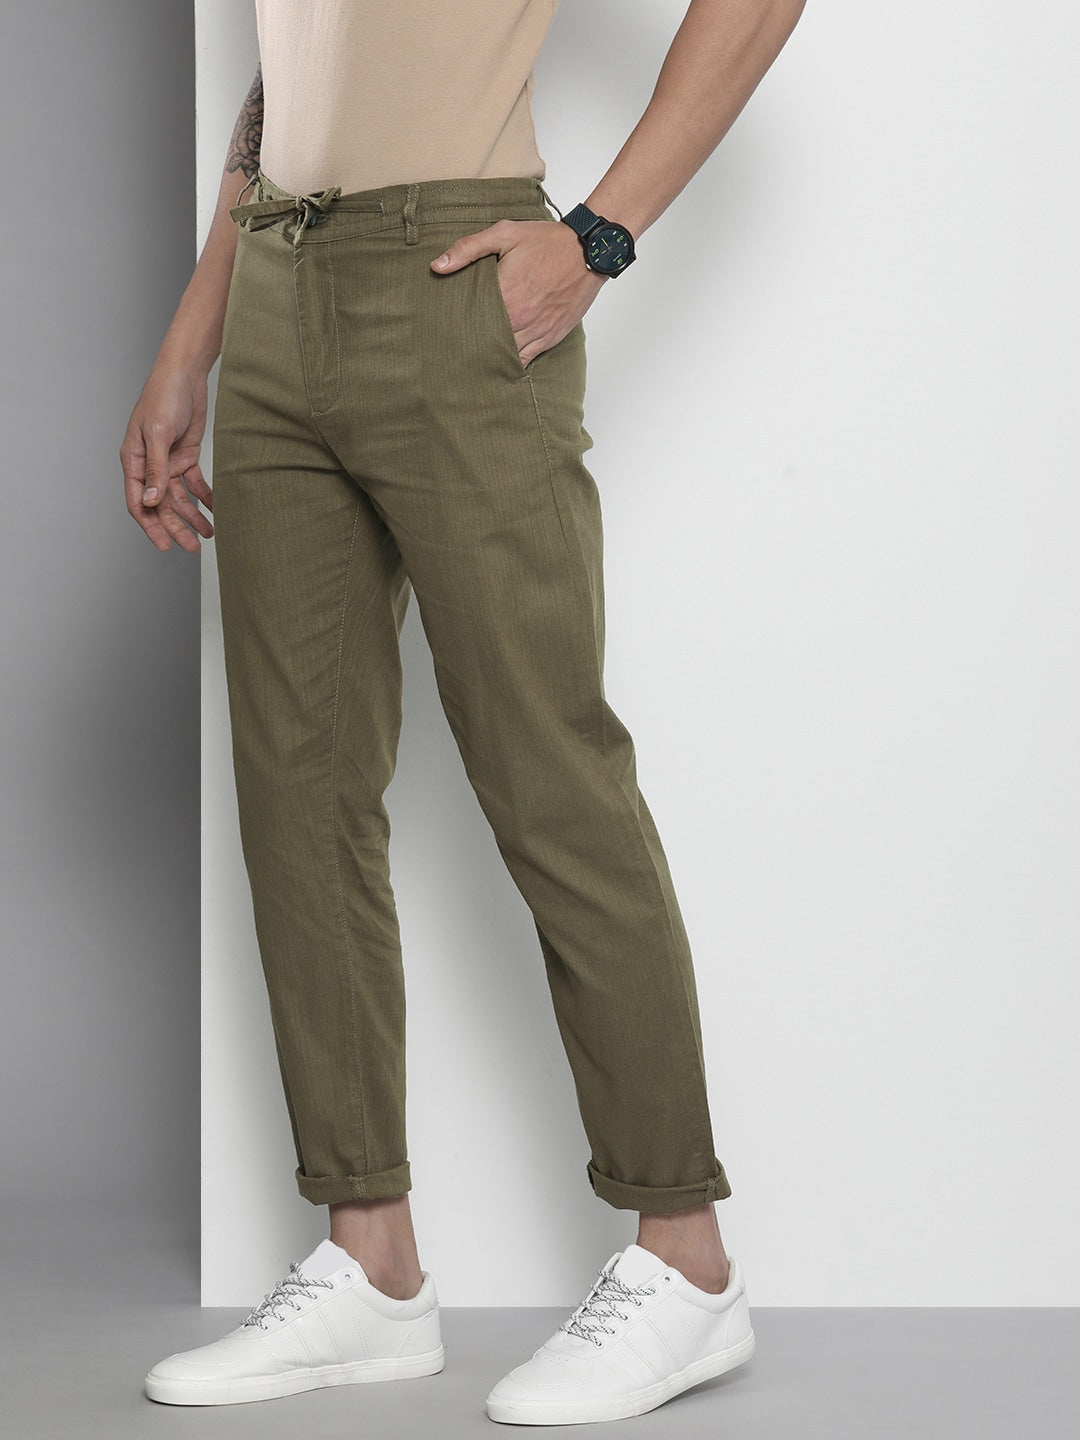 Buy Trousers For Women At Lowest Prices Online In India | Tata CLiQ